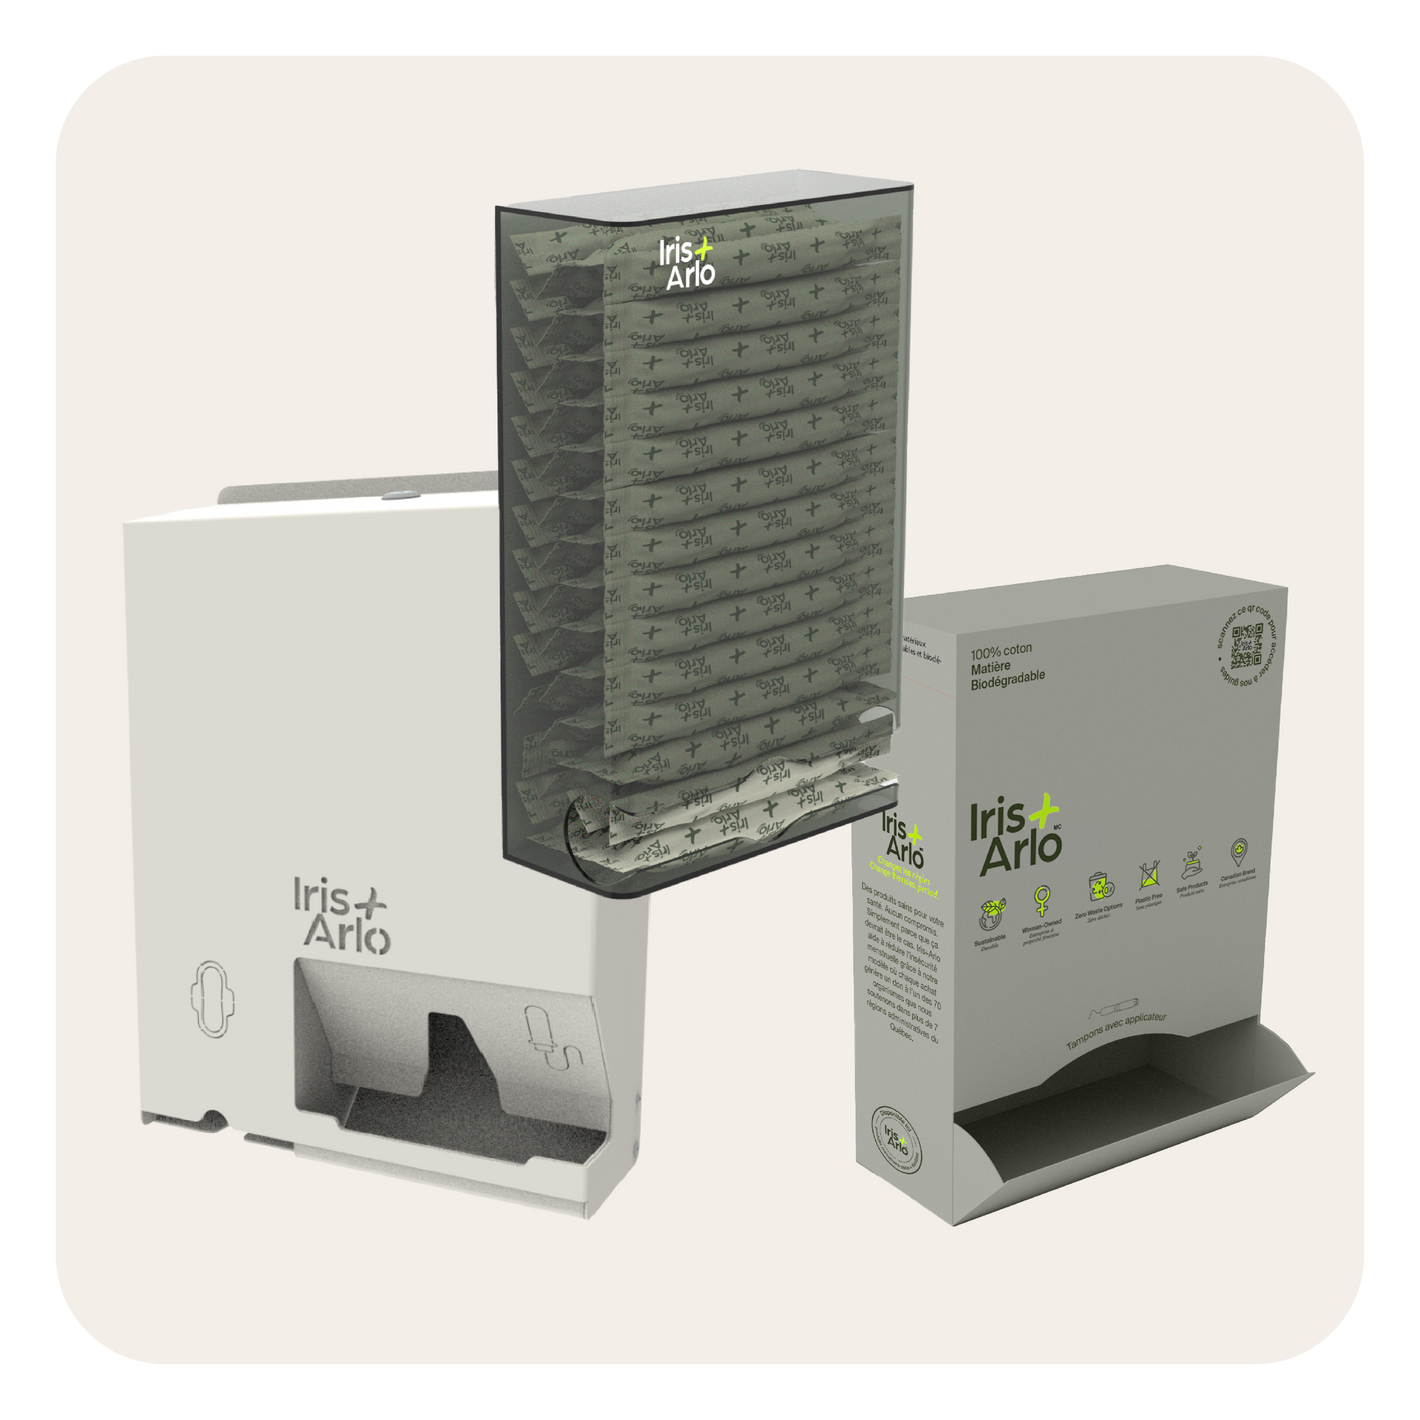 The 3 types of Iris + Arlo dispensers. There's an example of a metal dispenser, a Plexiglas dispenser and a cardboard dispenser. This is part of our B2B turnkey solution.